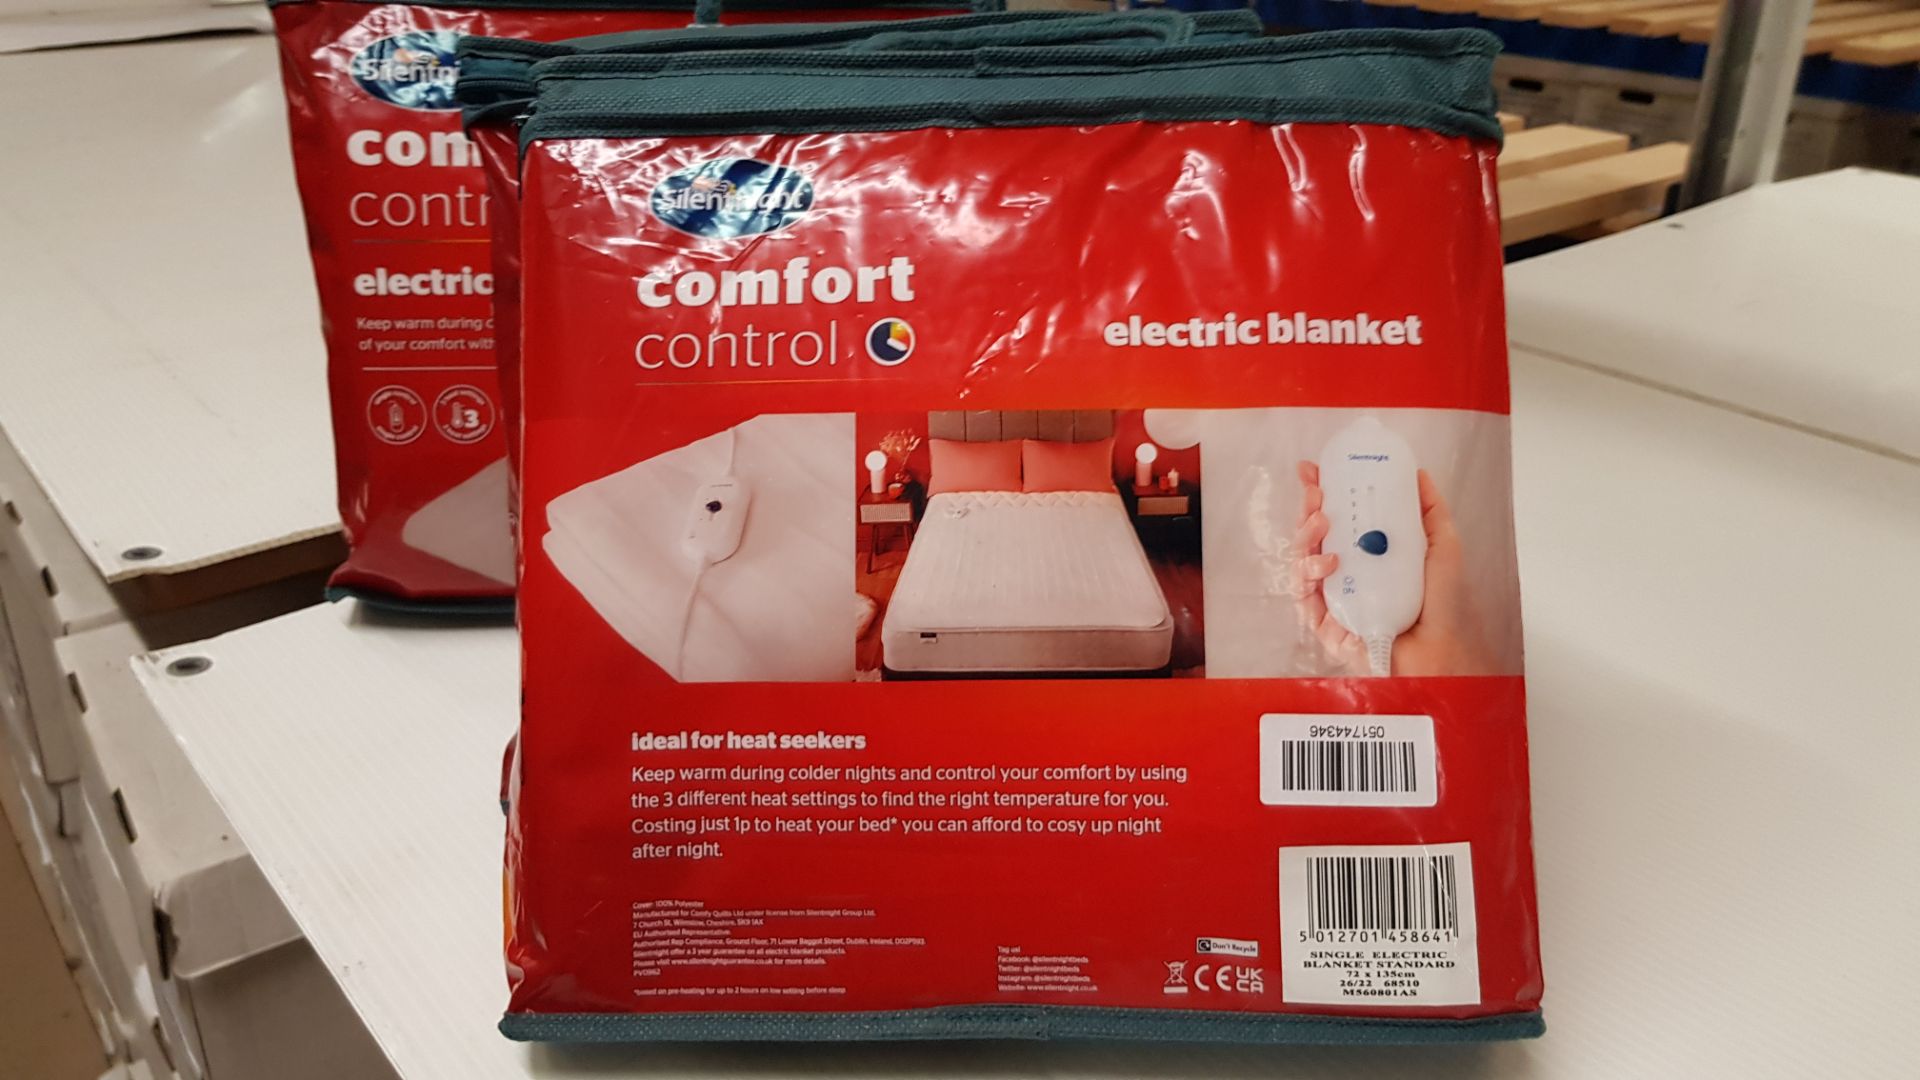 3x Silentnight Comfort Control Electric Blanket Single. RRP £45 Each. - Image 2 of 2